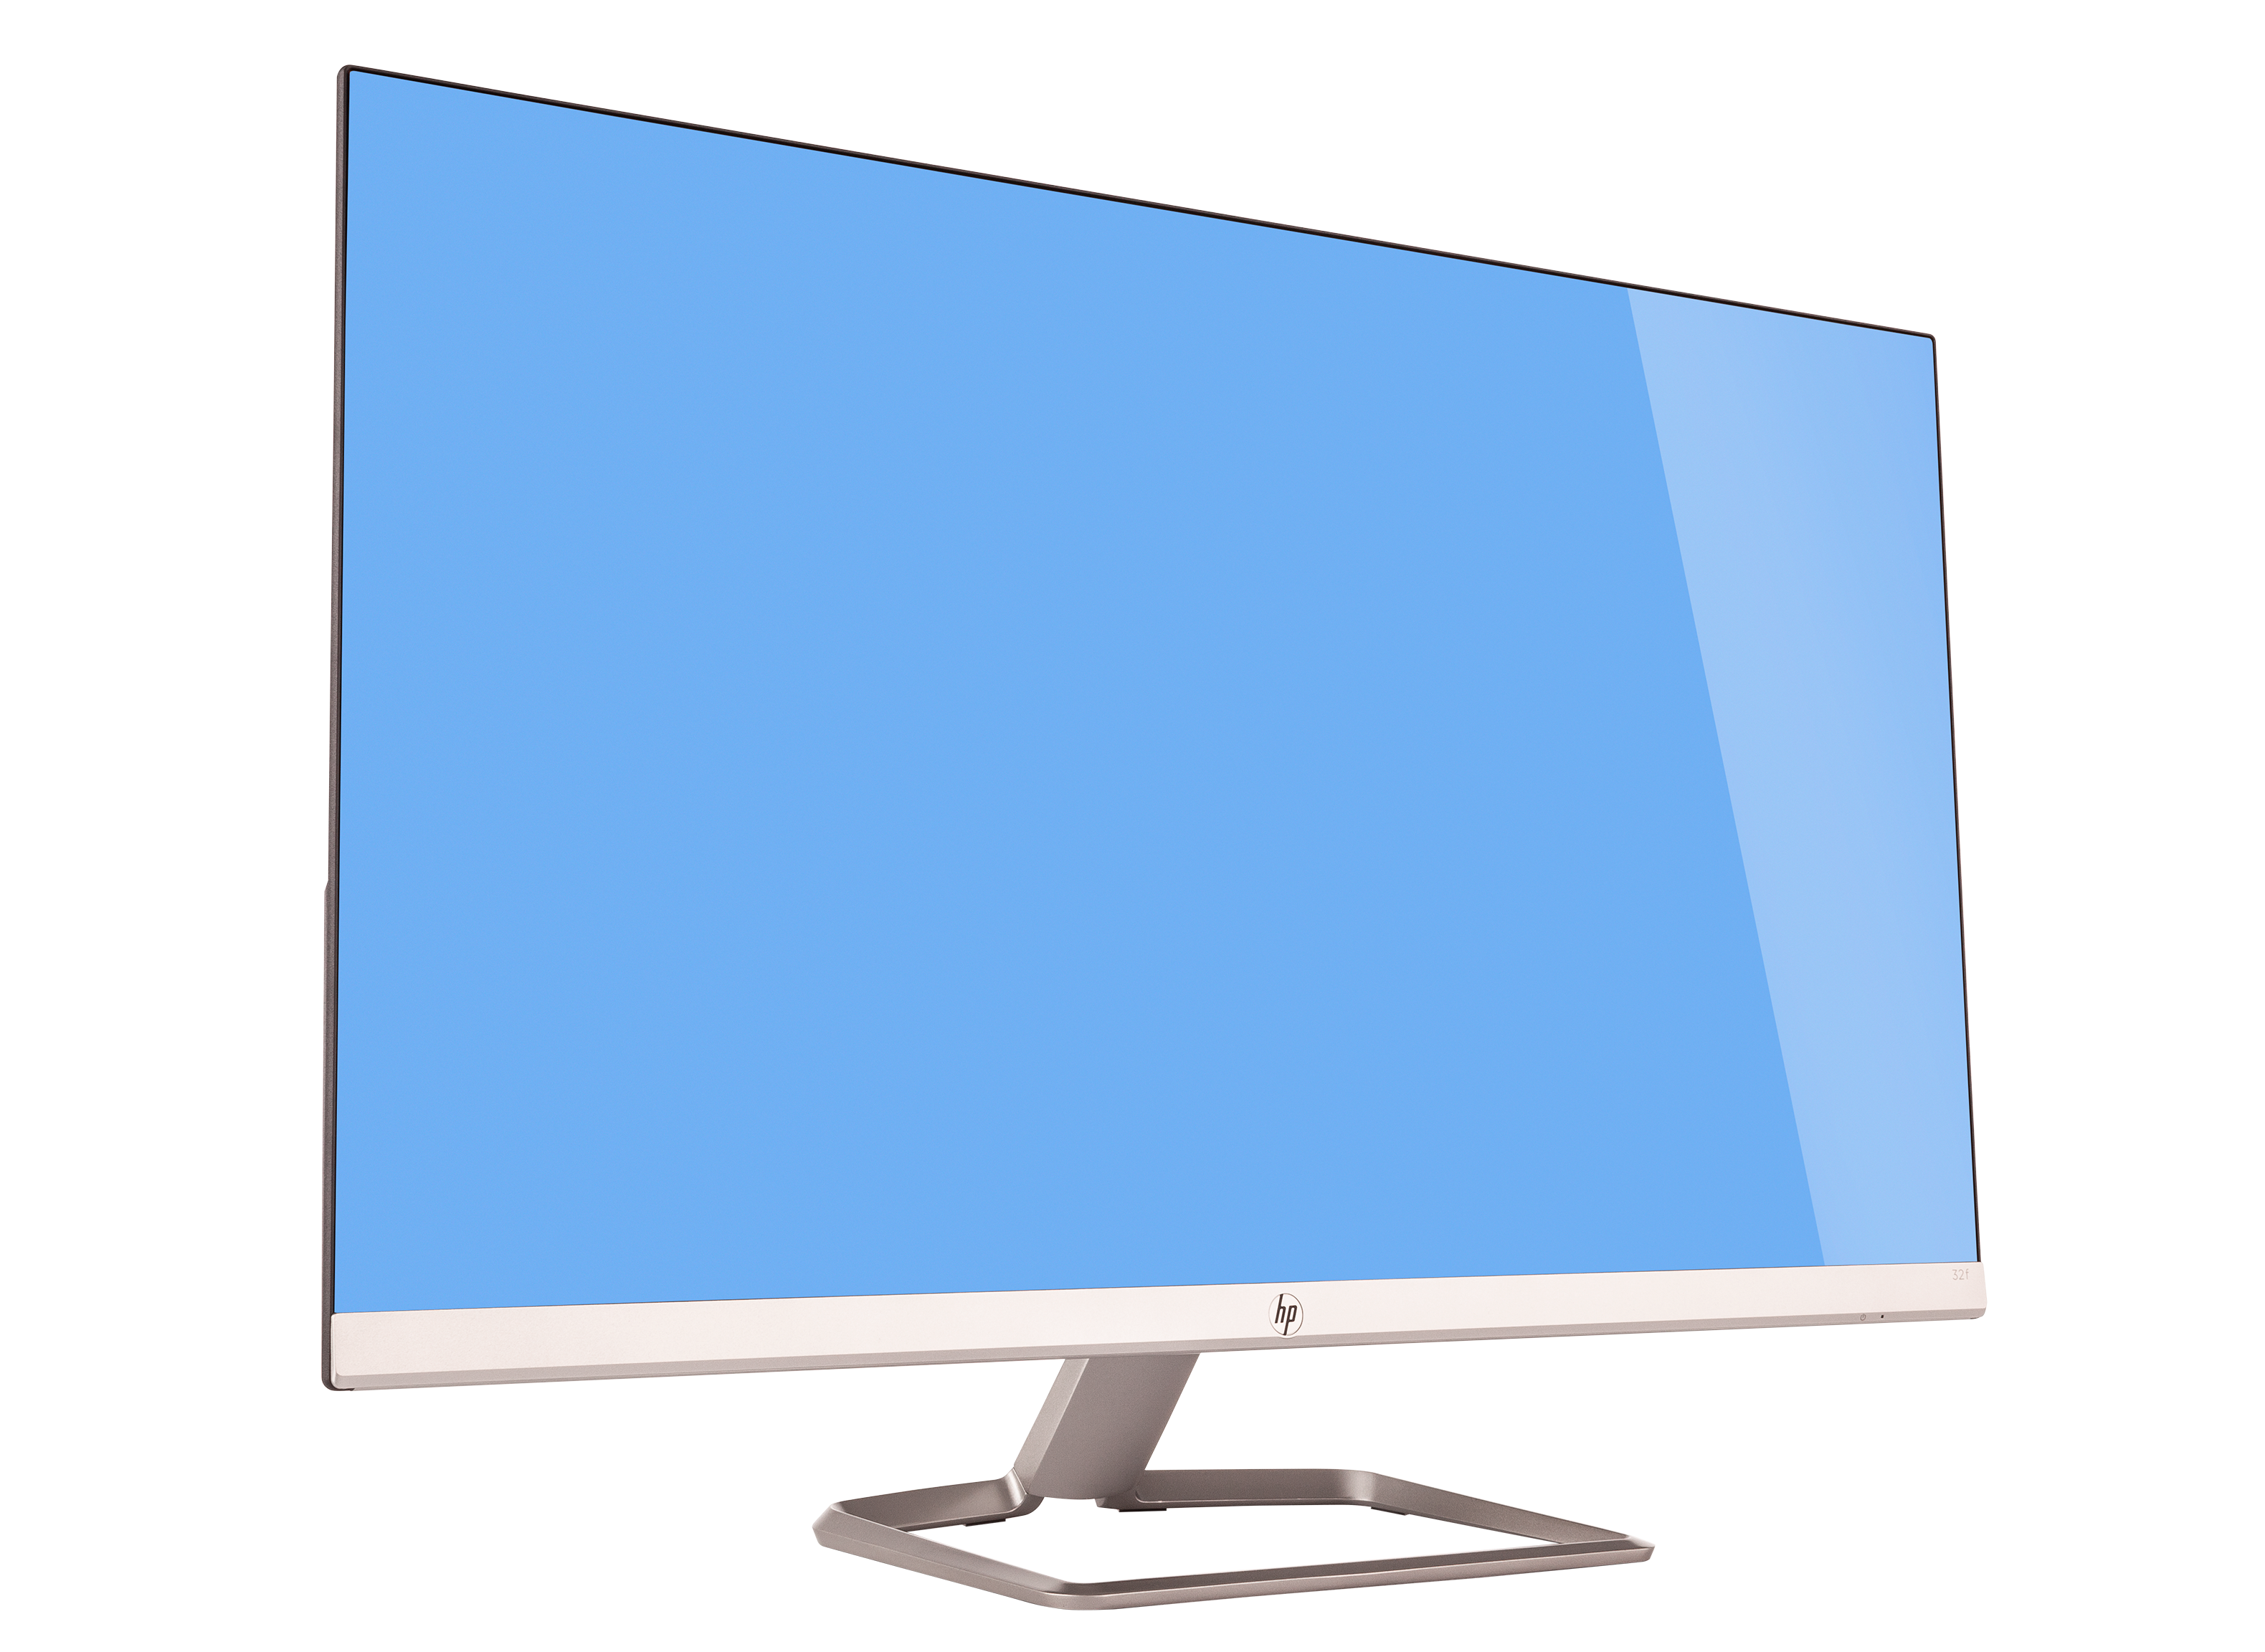 HP 32F Computer Monitor Review - Consumer Reports